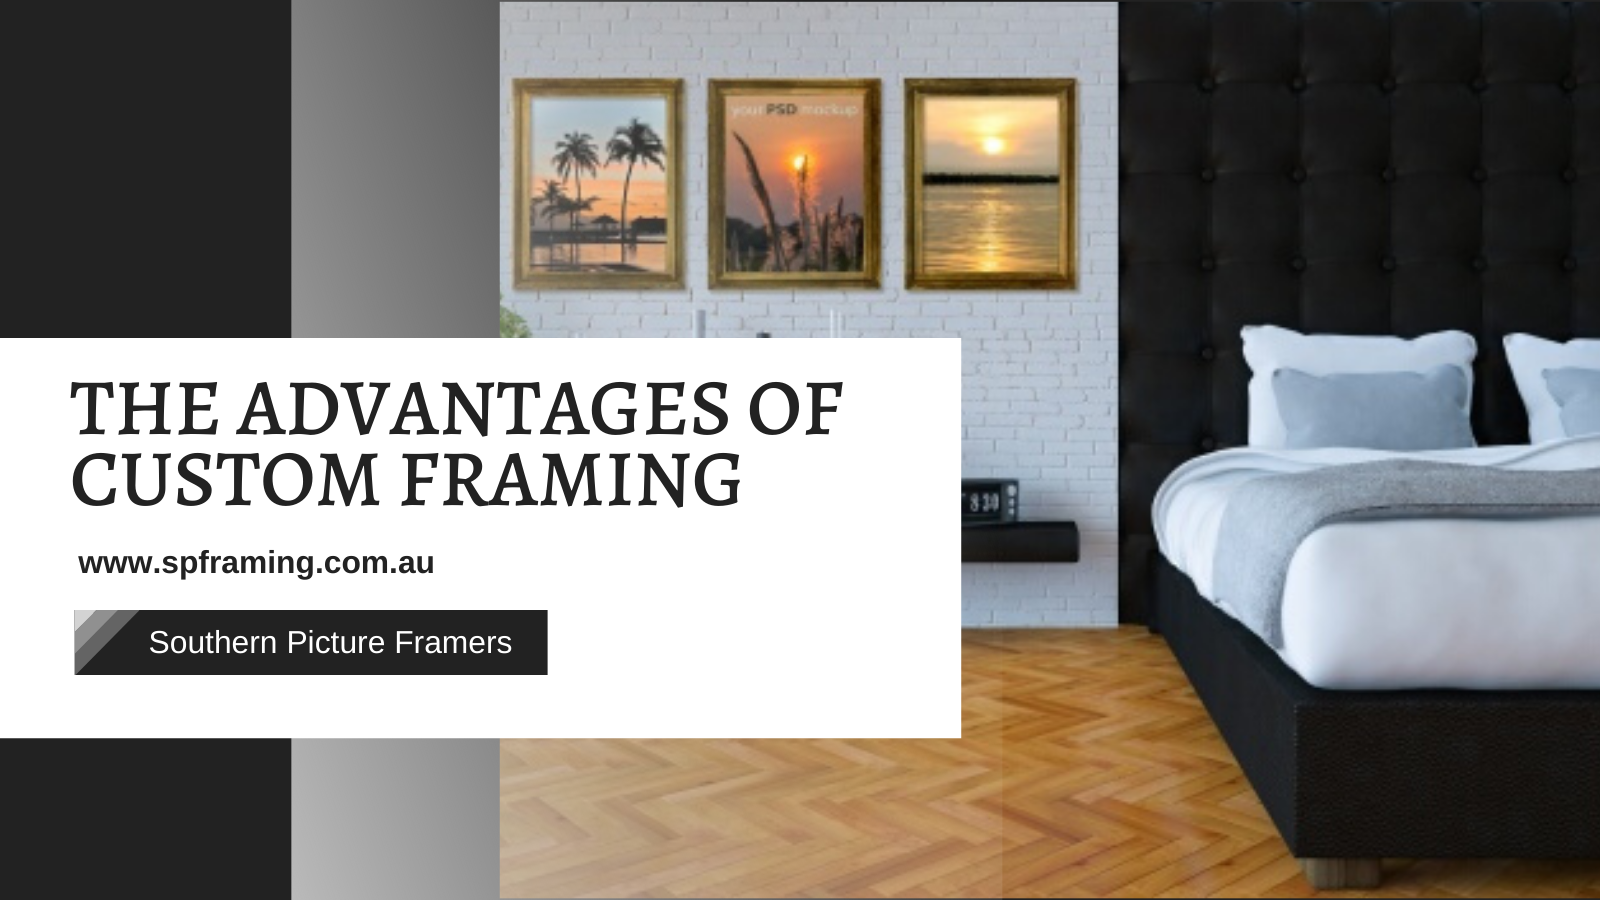 What Are The Advantages Of Custom Framing?